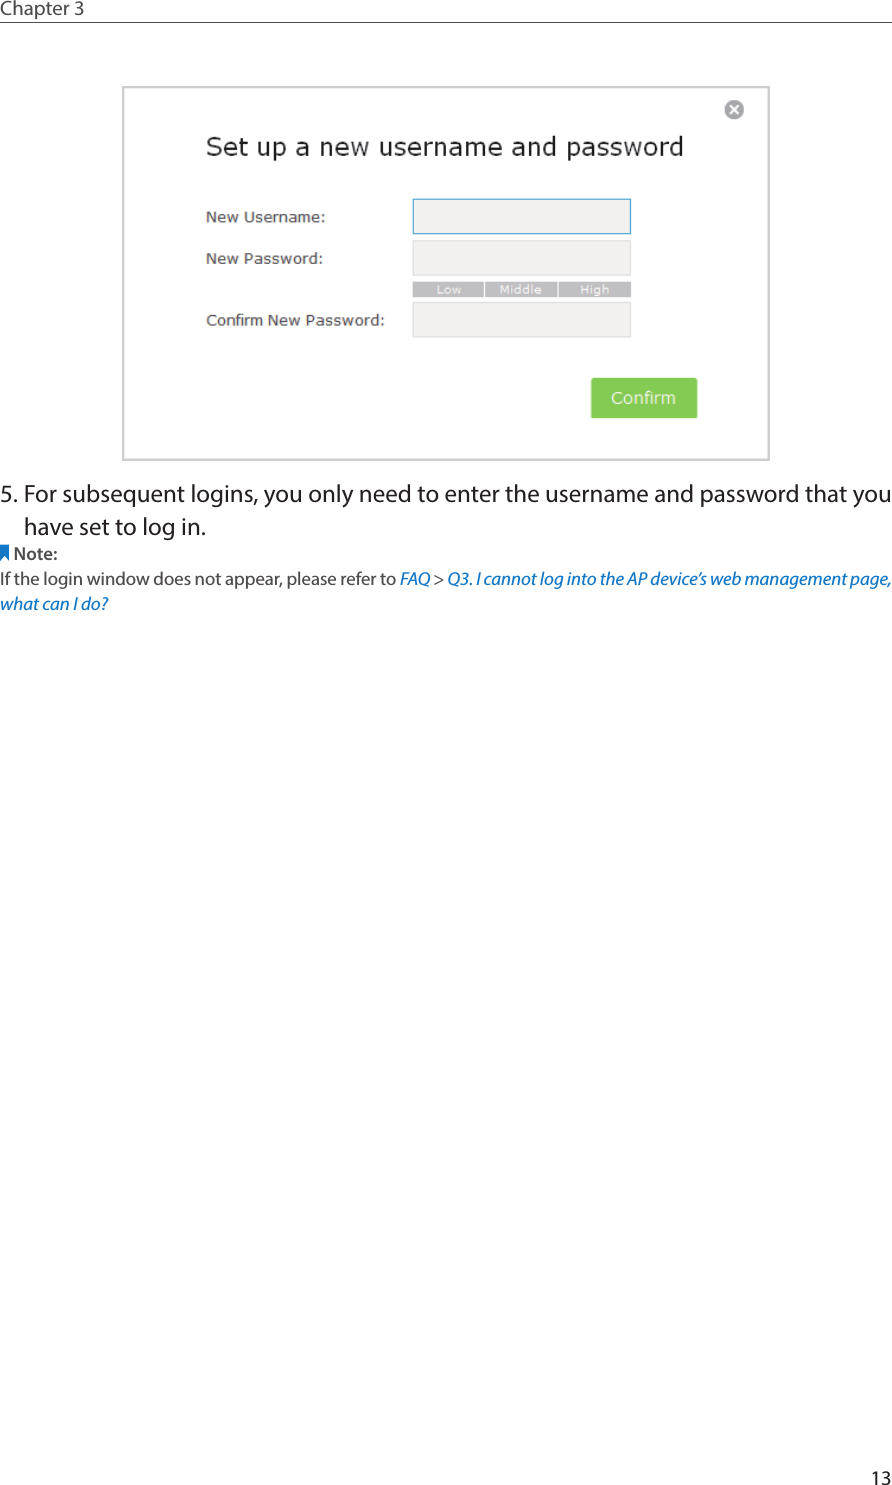 13Chapter 3  5. For subsequent logins, you only need to enter the username and password that you have set to log in.Note: If the login window does not appear, please refer to FAQ &gt; Q3. I cannot log into the AP device’s web management page, what can I do?